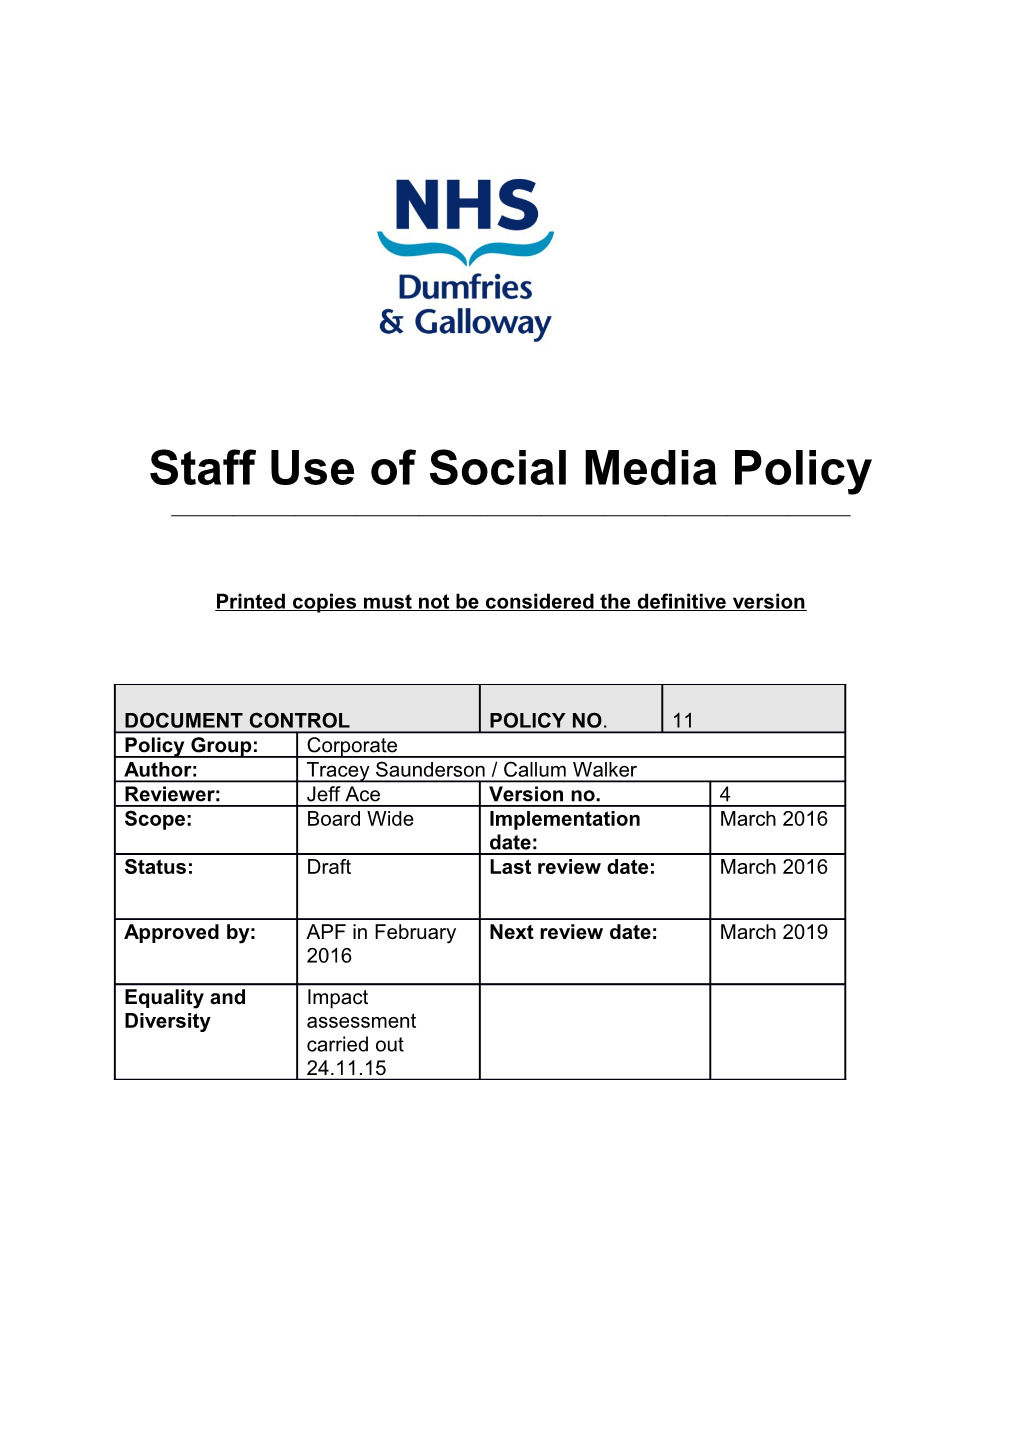 Staff Use of Social Media Policy